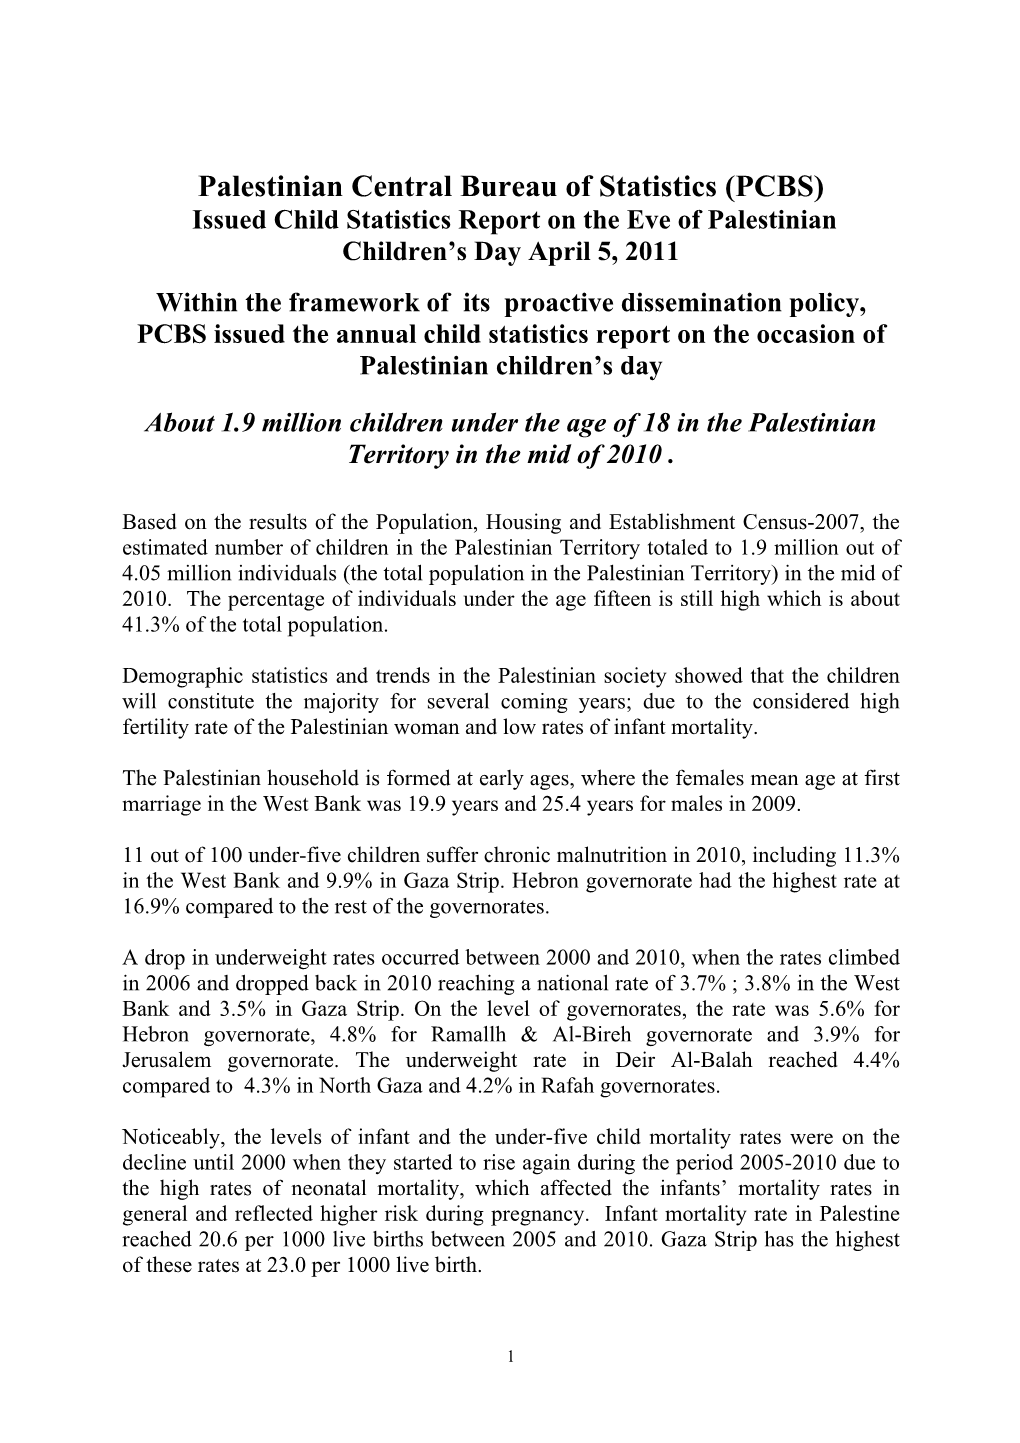 Palestinian Central Bureau of Statistics (PCBS) Issued Child Statistics Report on the Eve of Palestinian Children’S Day April 5, 2011